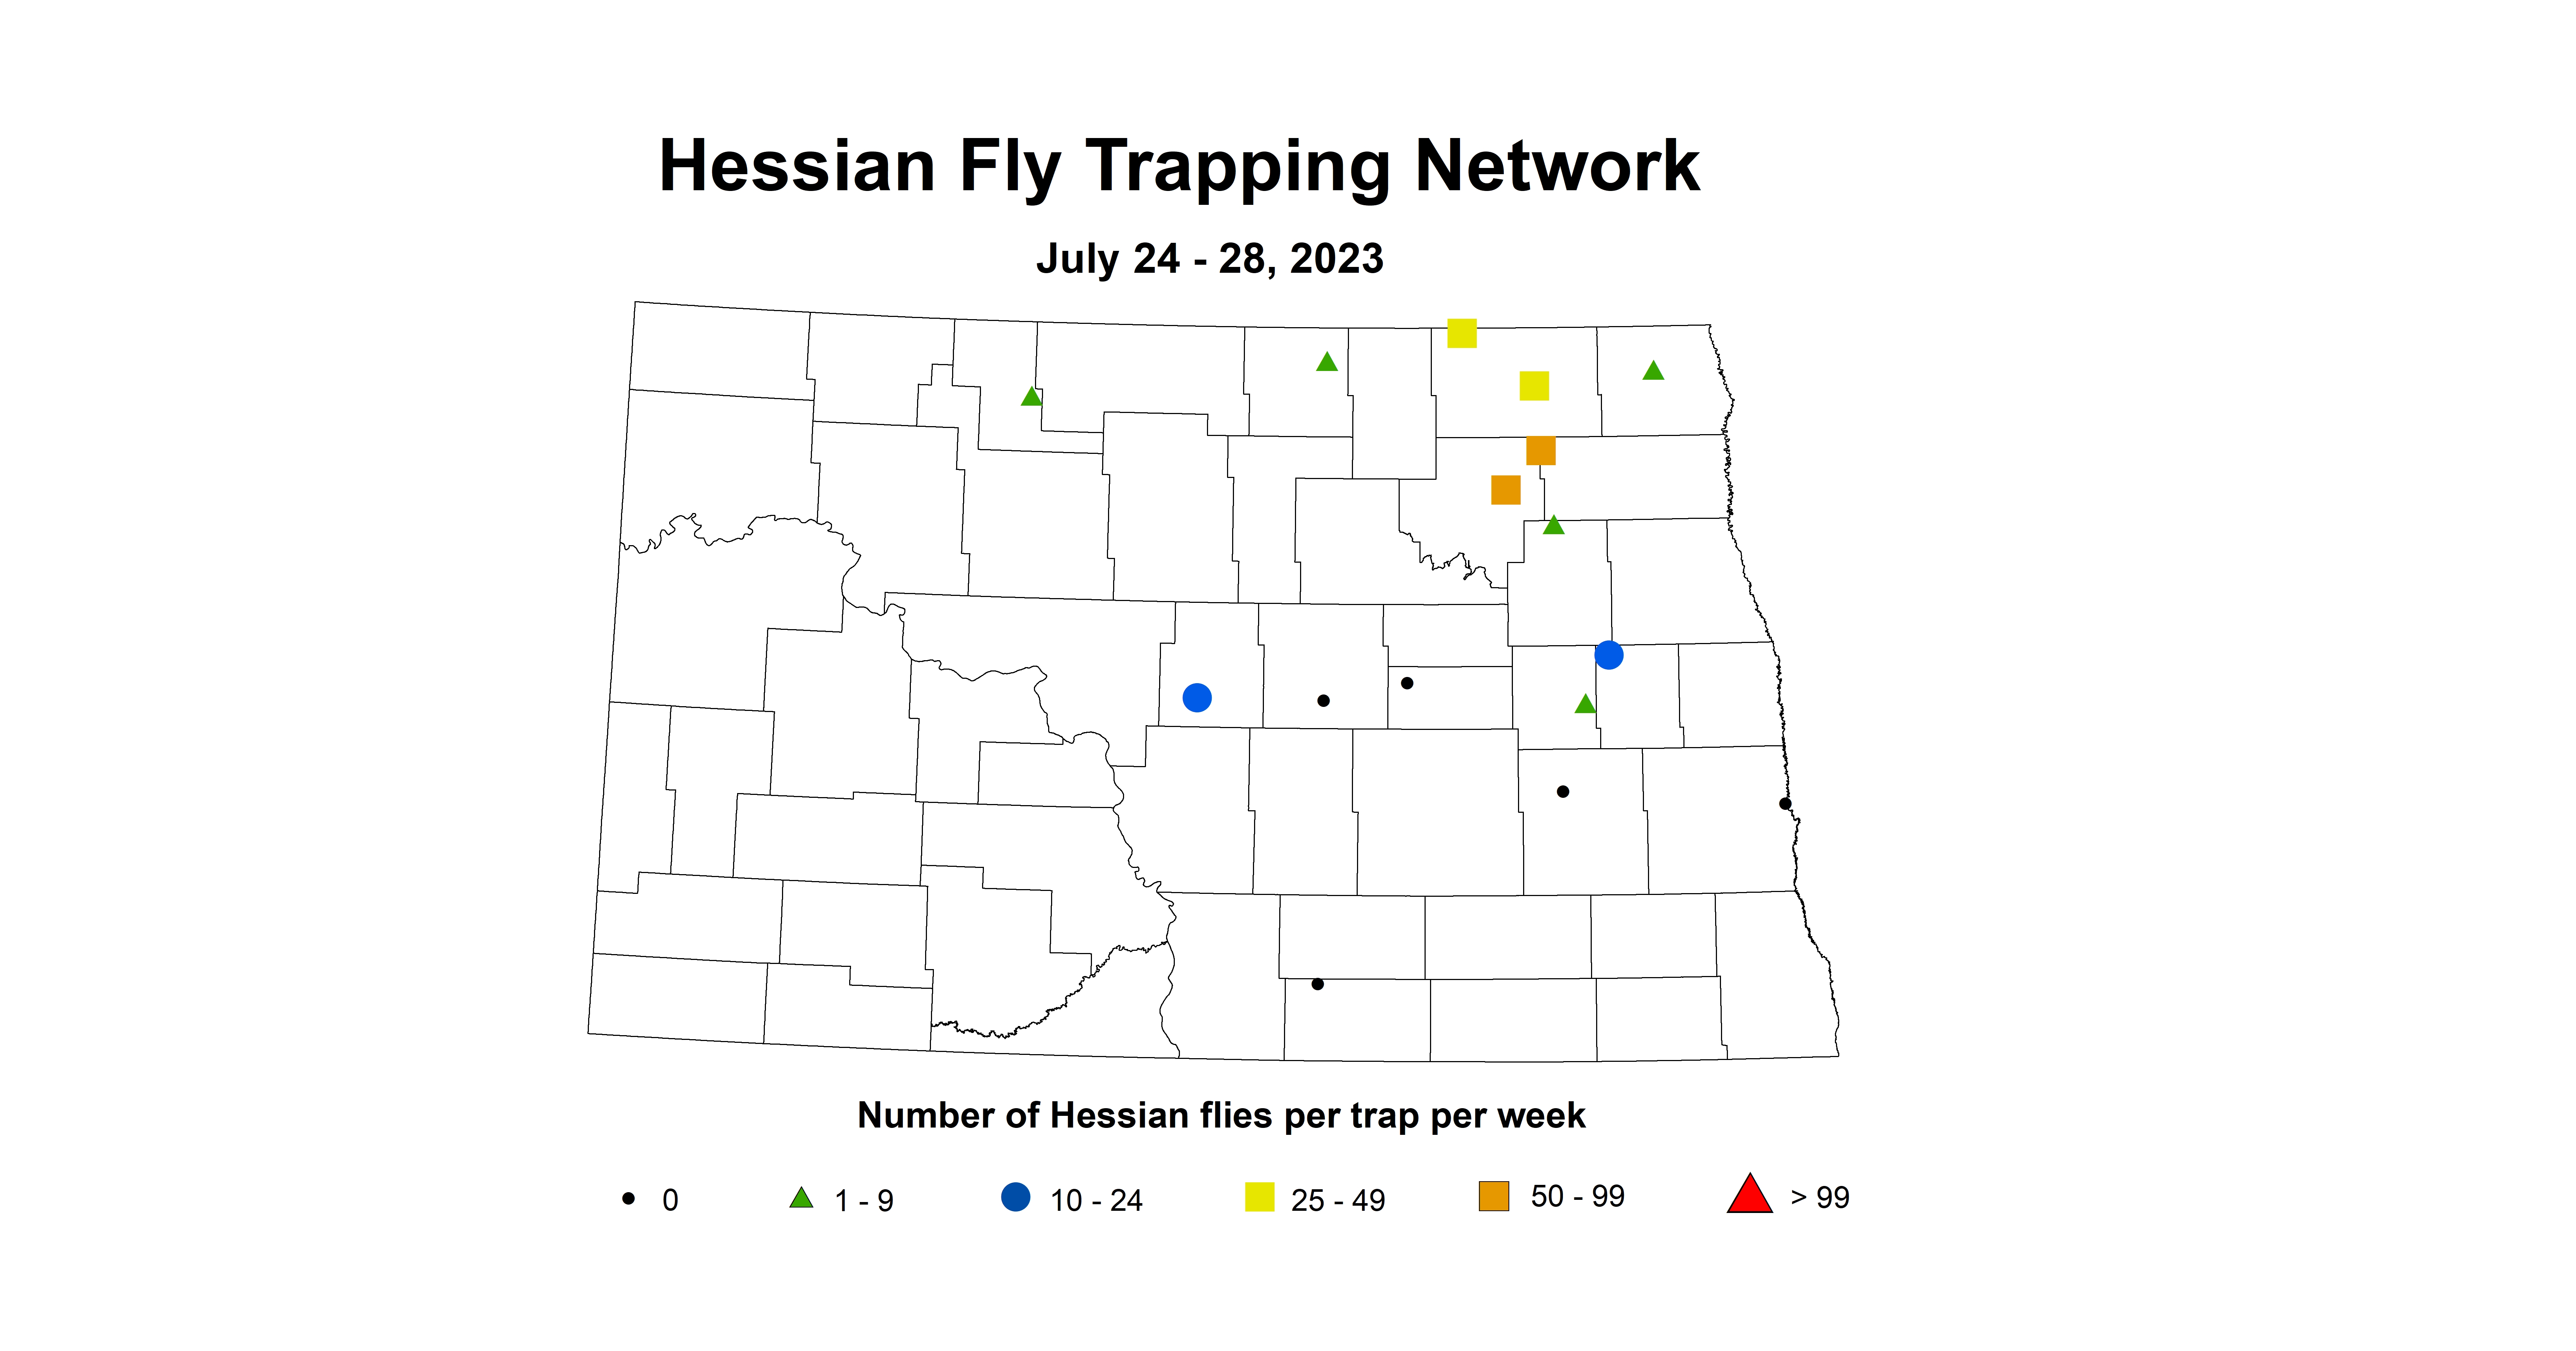 wheat insecttrap hessian fly July 24-28 2023